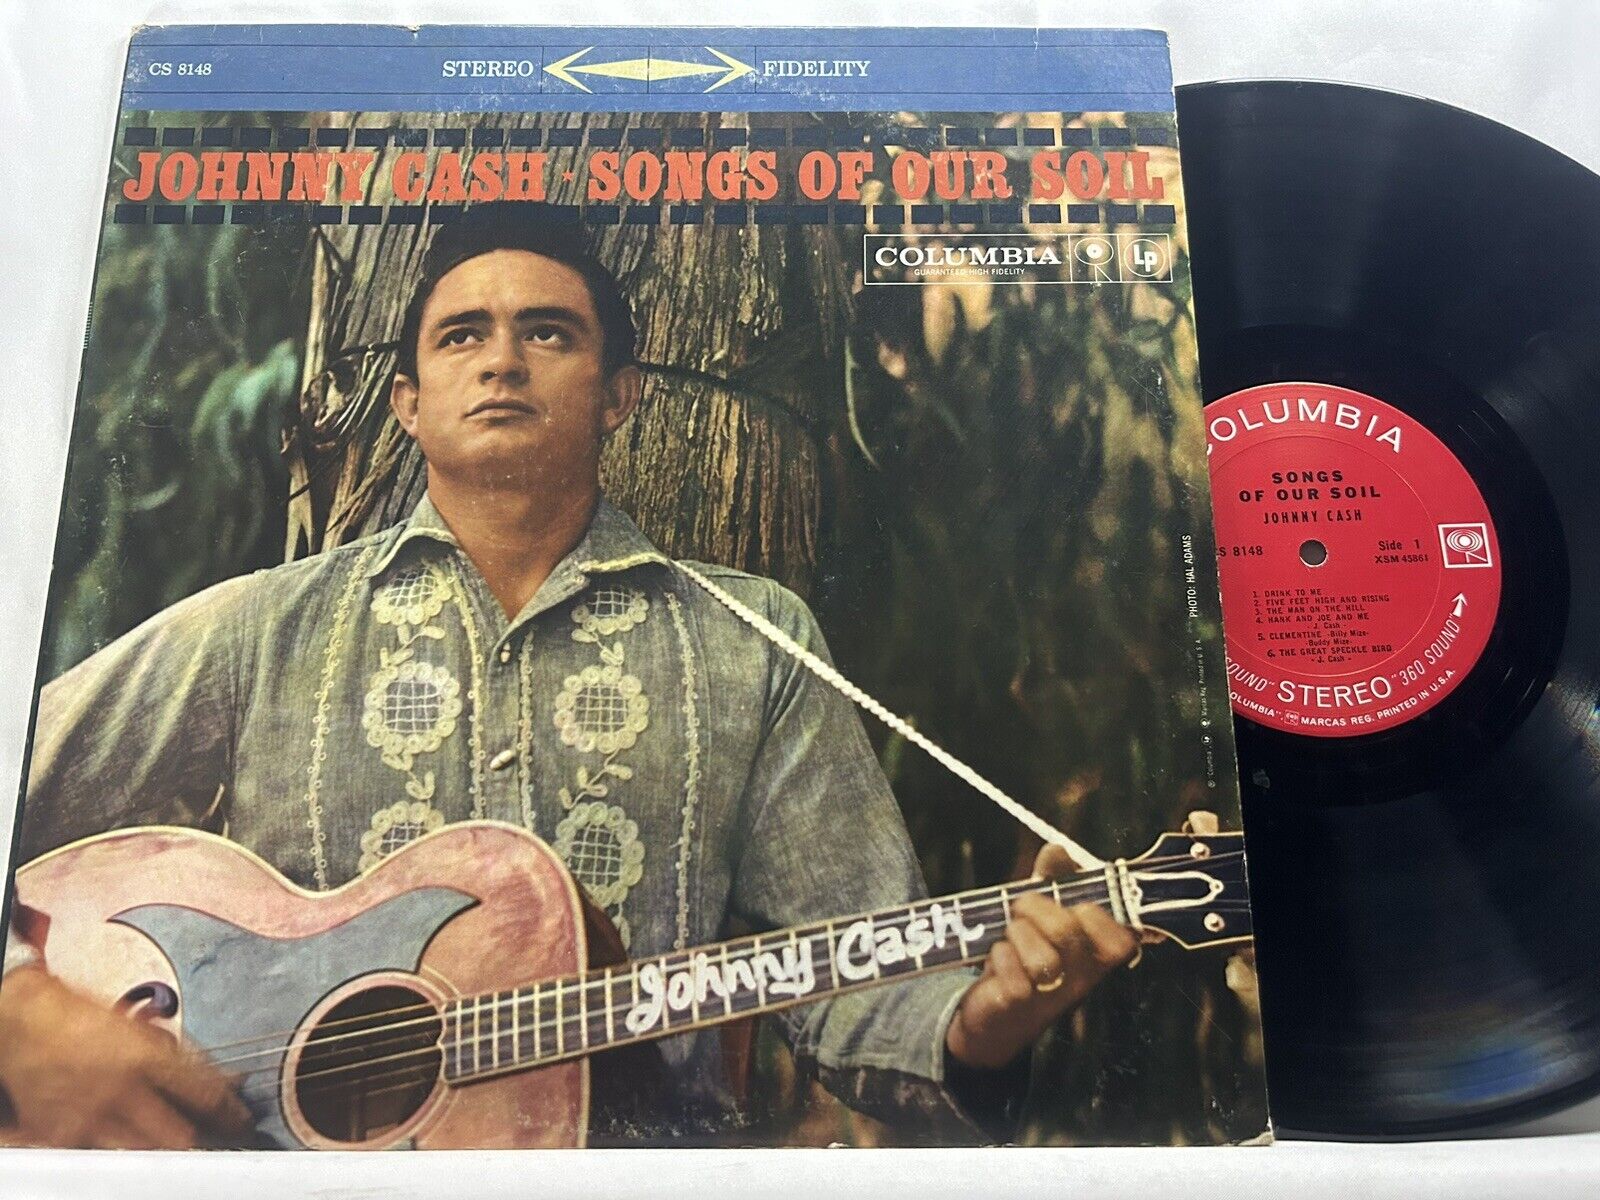 Johnny Cash Songs Of Our Soil CS 8148 Columbia 2 Eye No Barcode Tested VG+ VG+